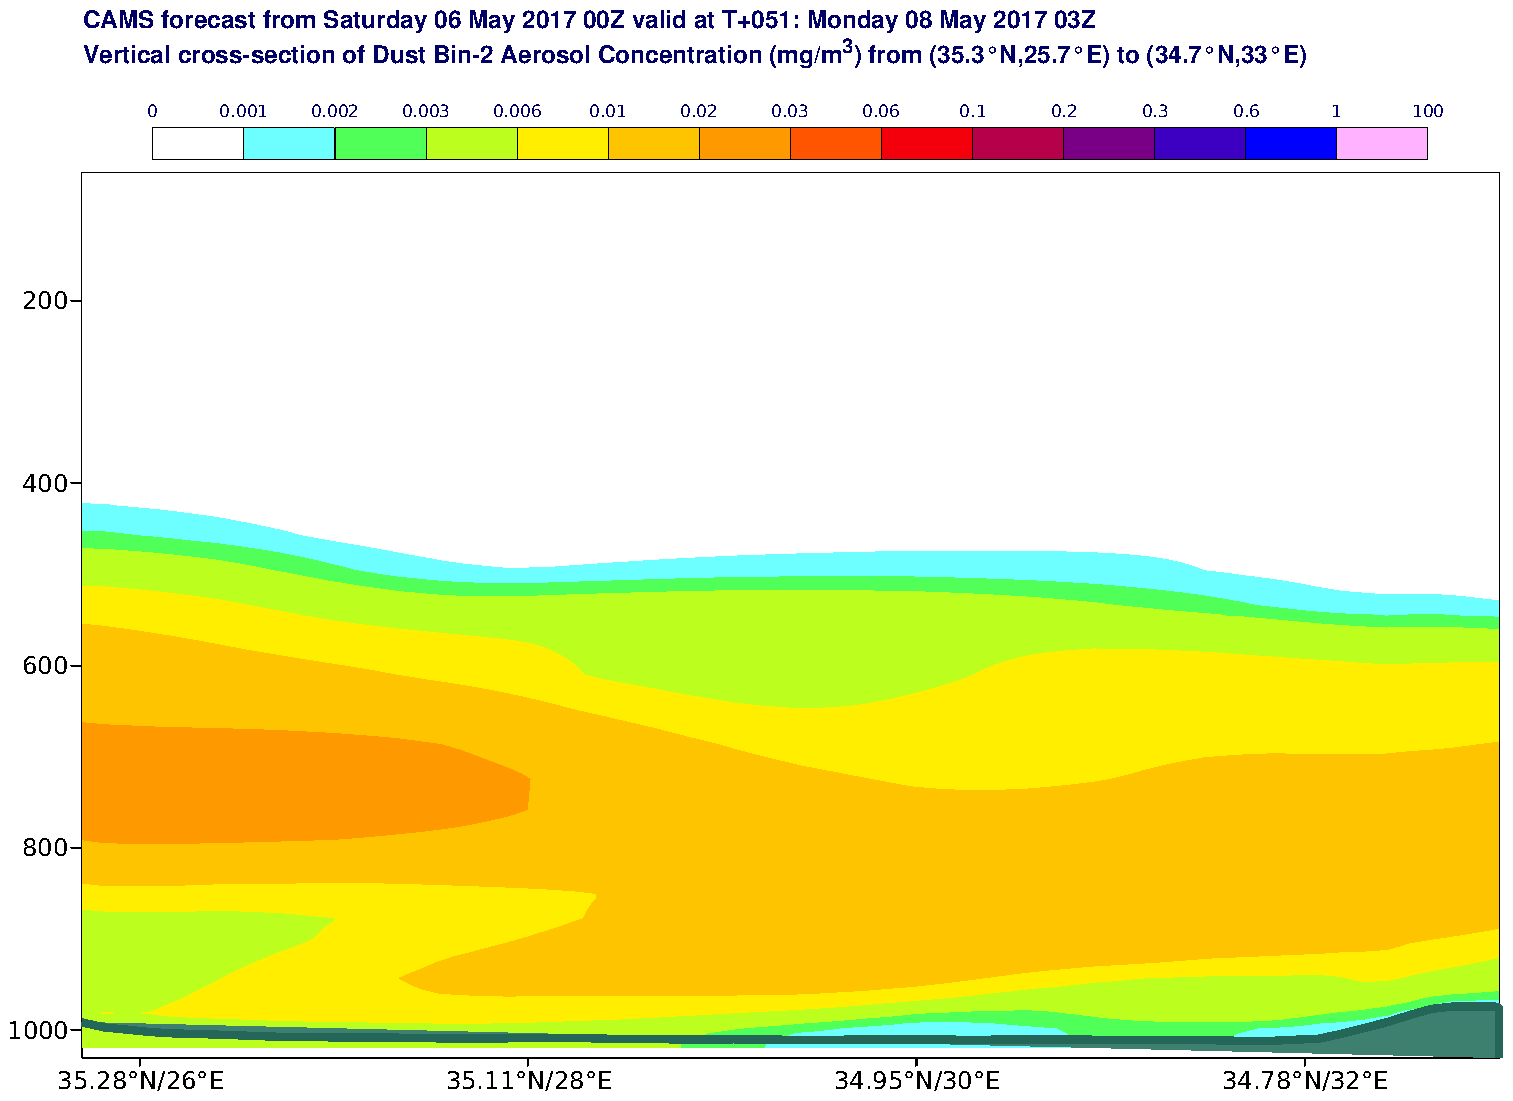 Vertical cross-section of Dust Bin-2 Aerosol Concentration (mg/m3) valid at T51 - 2017-05-08 03:00